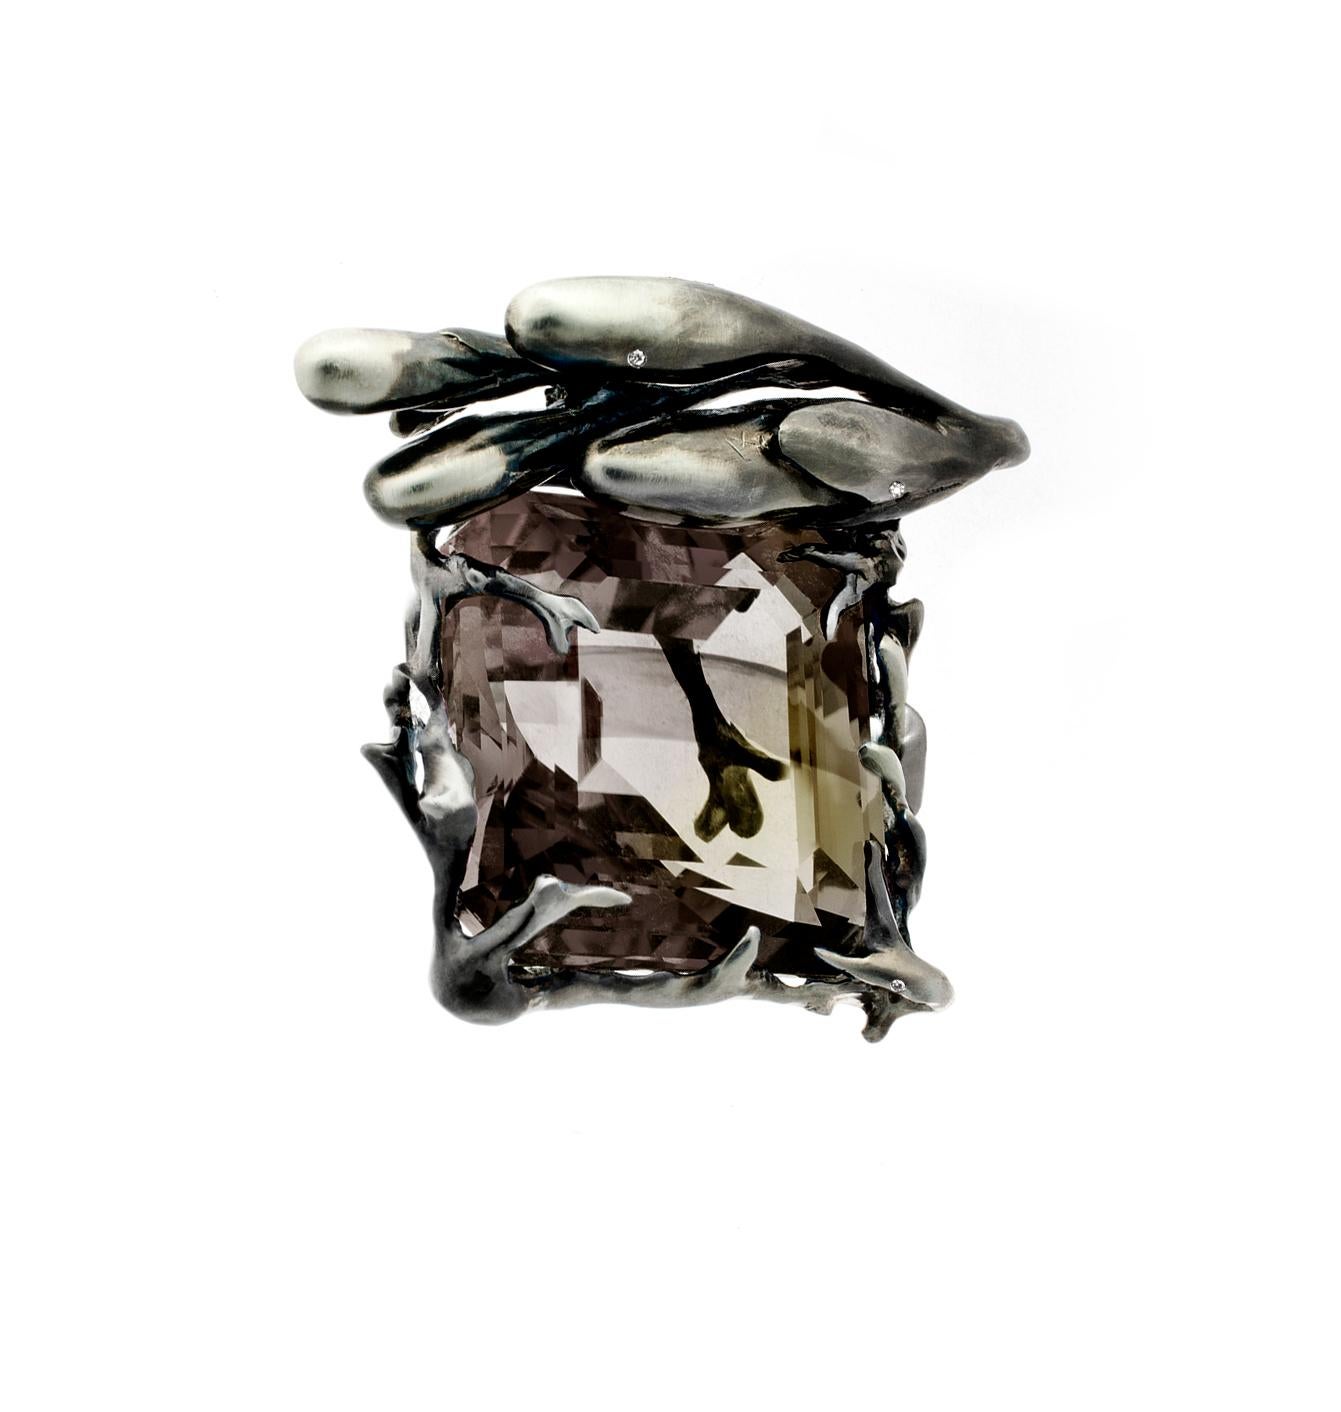 This contemporary ring in 18 karat black gold with diamonds and a large smoky quartz (octagon) was featured in a published issue of Vogue UA. This piece can be personally signed.

The ring features four white round diamonds and a large smoky quartz